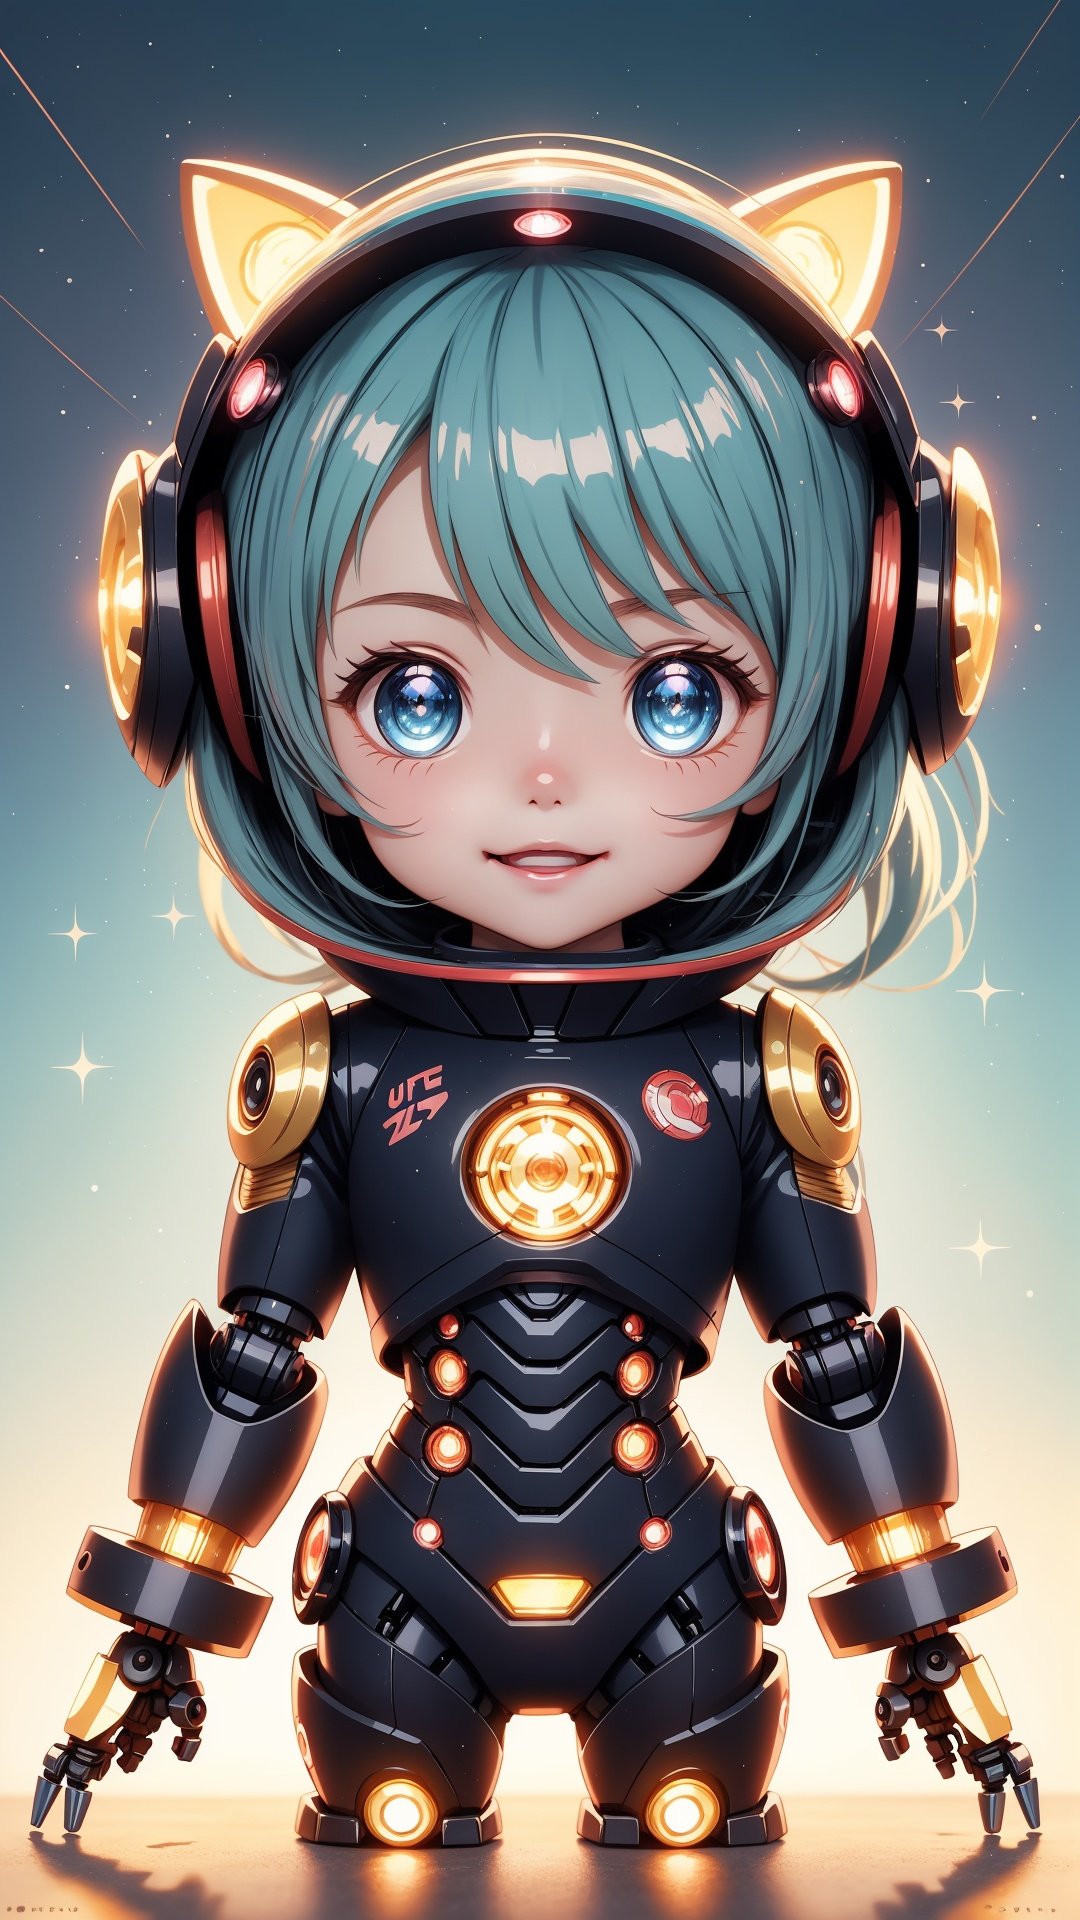 (best quality,ultra-detailed),Cute Chibi Robot,illustration,[bright colors],[sparkling eyes],[playful pose],fun and energetic,medium:anime-style,soft lighting